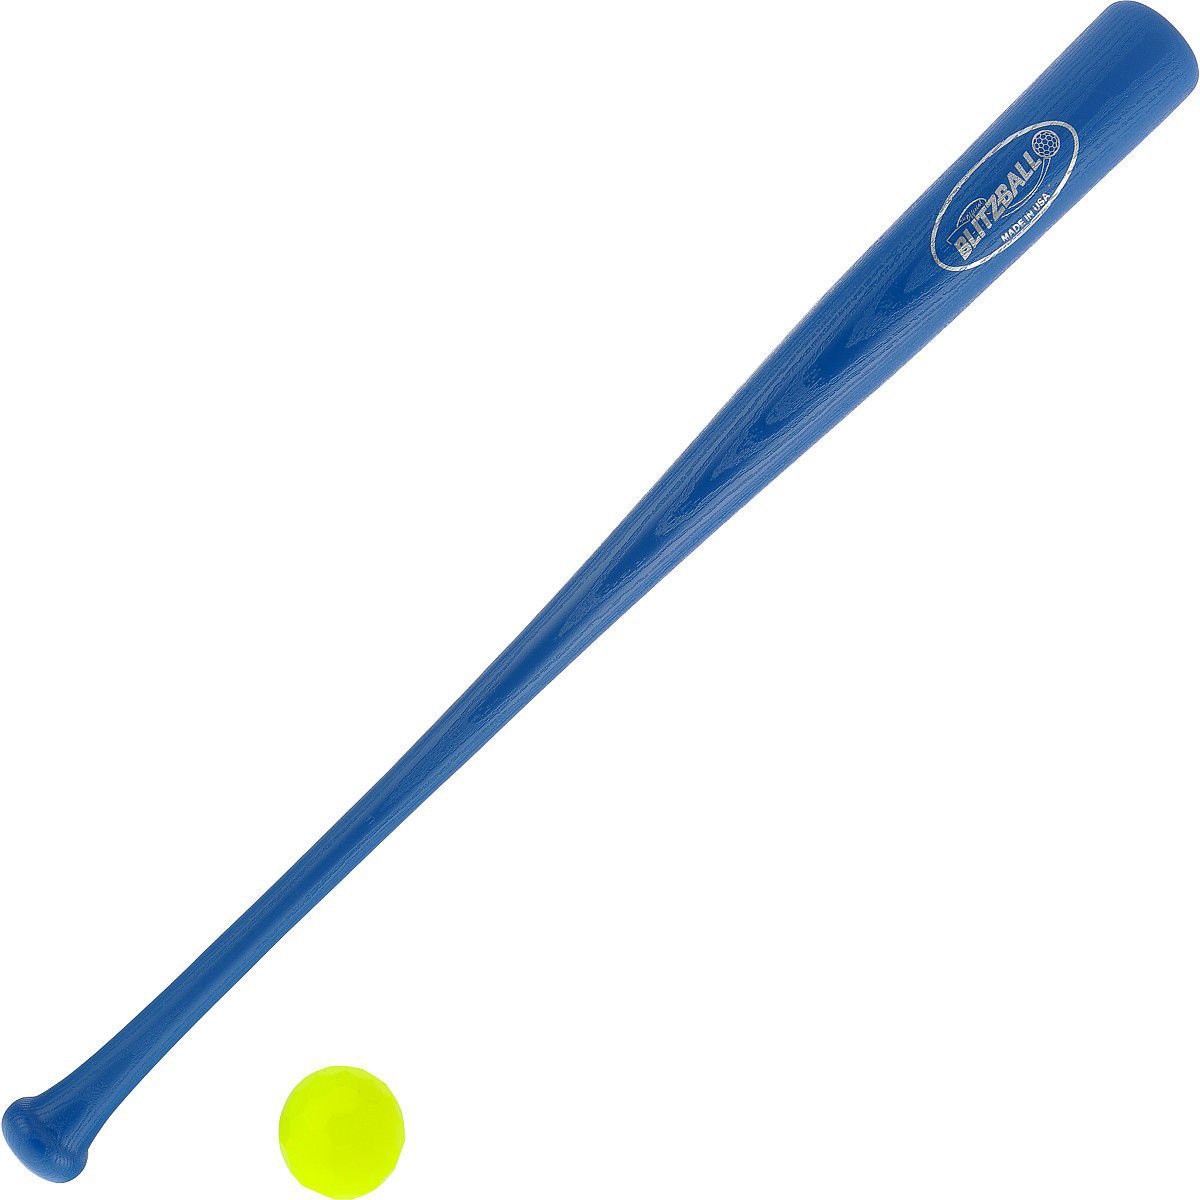 Official Blitzball Starter Pack Includes Plastic Bat And 2 Blitz Balls Whiffle 